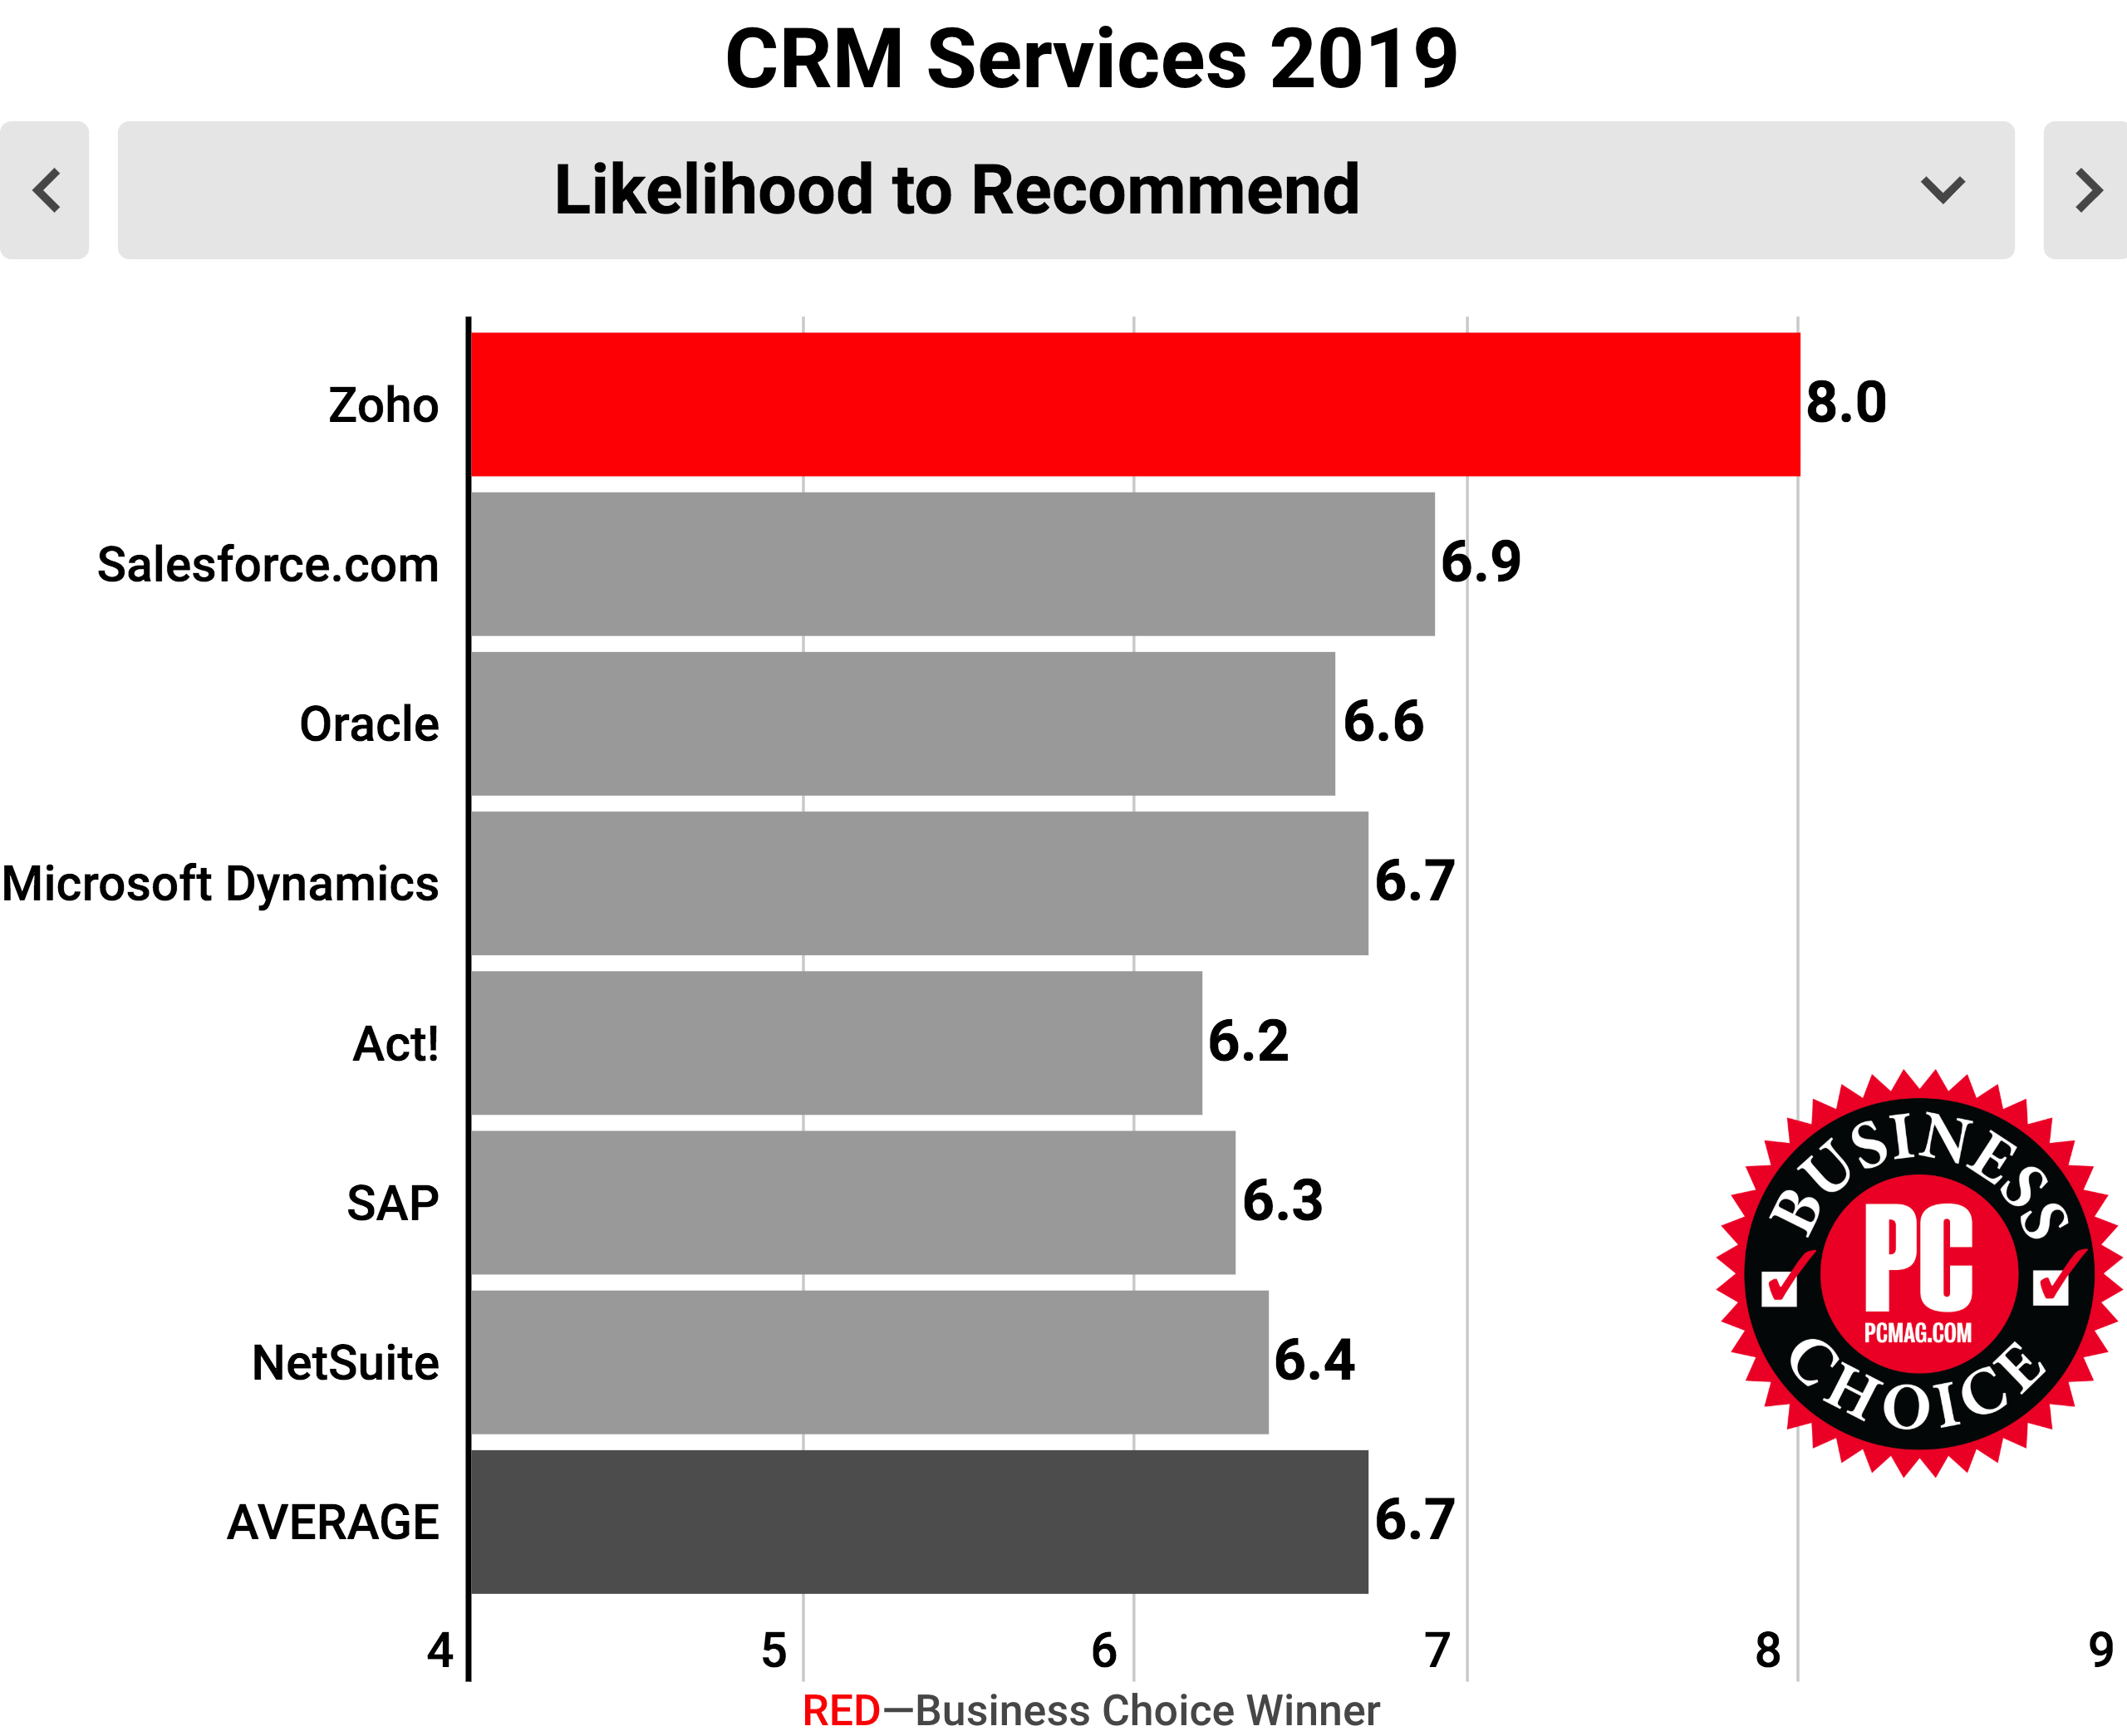 Most recommended CRM software - Zoho CRM